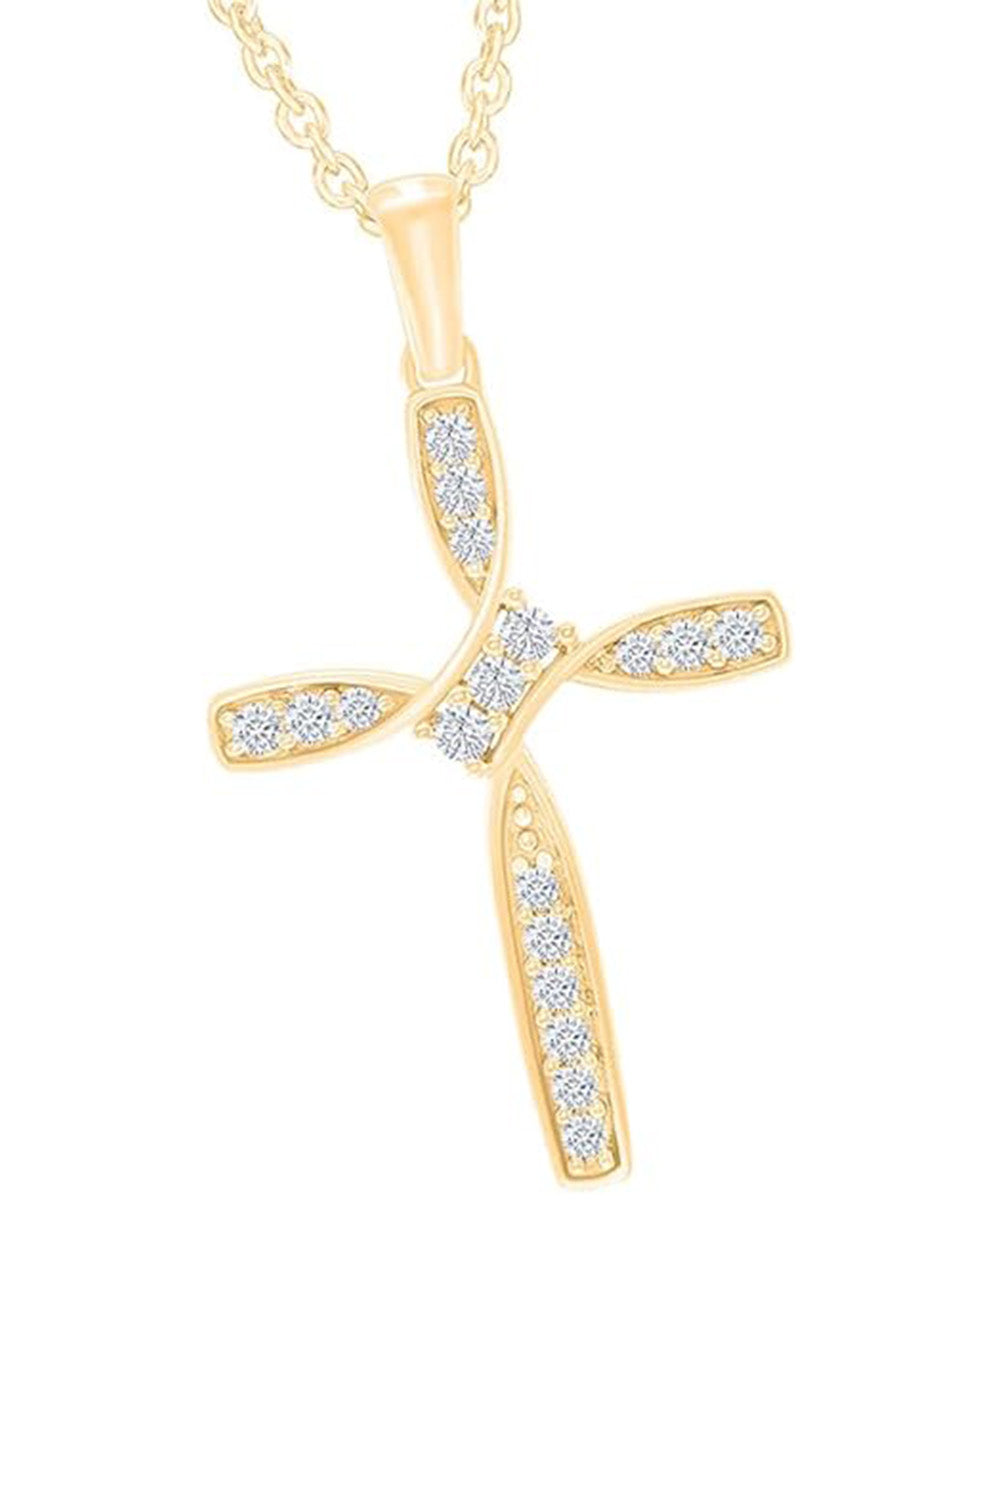 Yellow Gold Color Yaathi Bypass Cross Pendant Necklace,  Jewellery